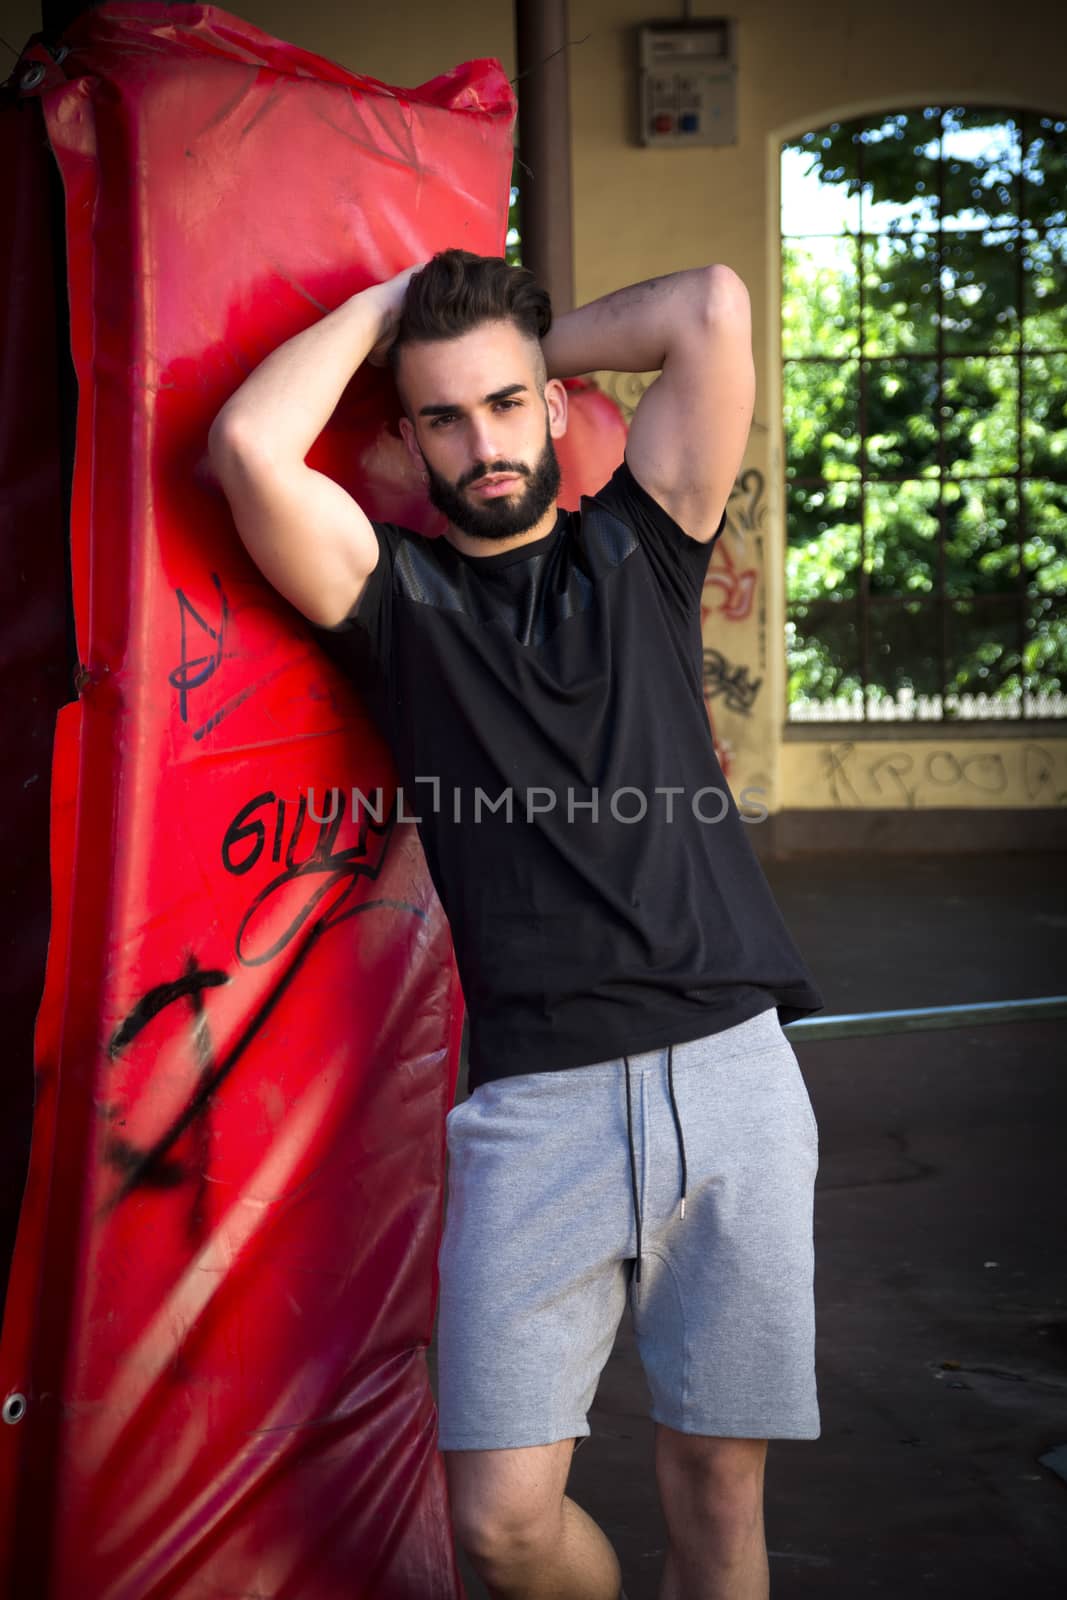 Handsome young man with beard, wearing t-shirt and shorts, standing and looking at camera